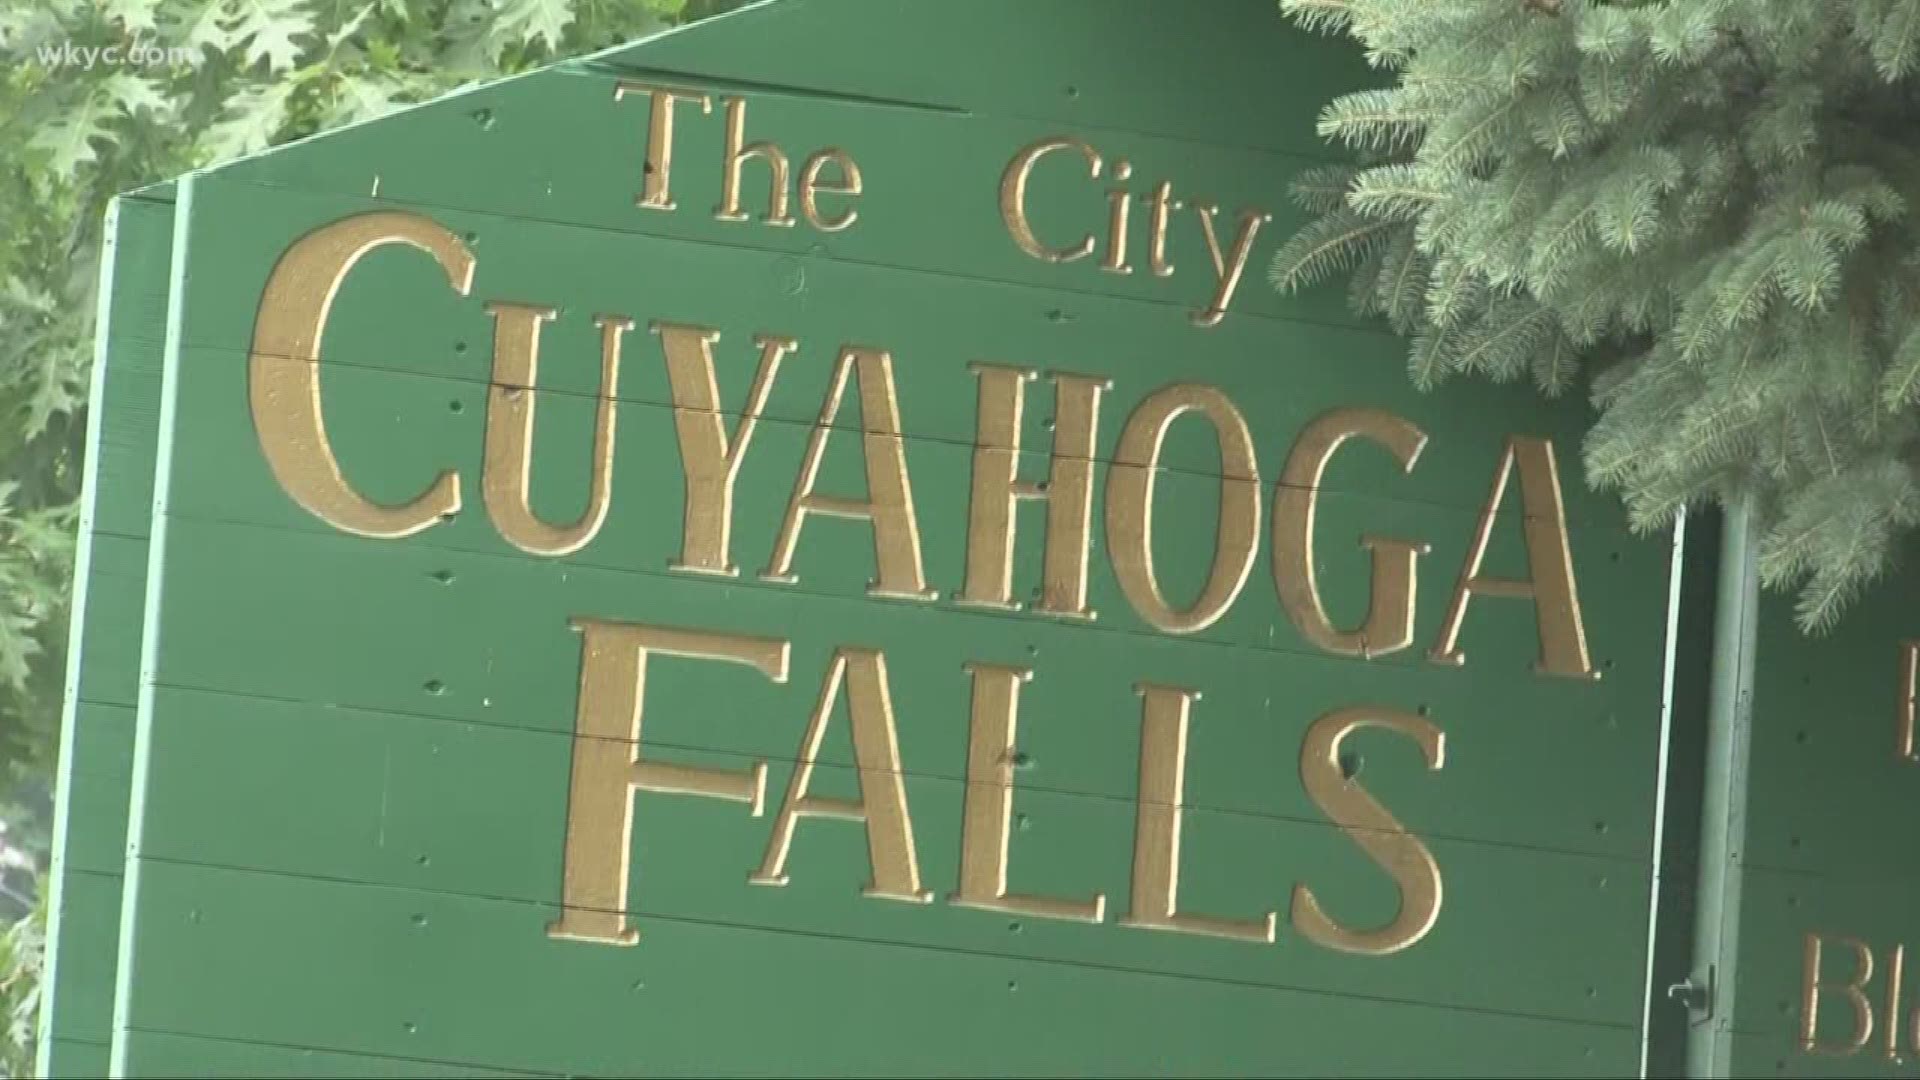 Oct. 10, 2018: WKYC's Jasmine Monroe takes us on a tour of the coolest places throughout Cuyahoga Falls.